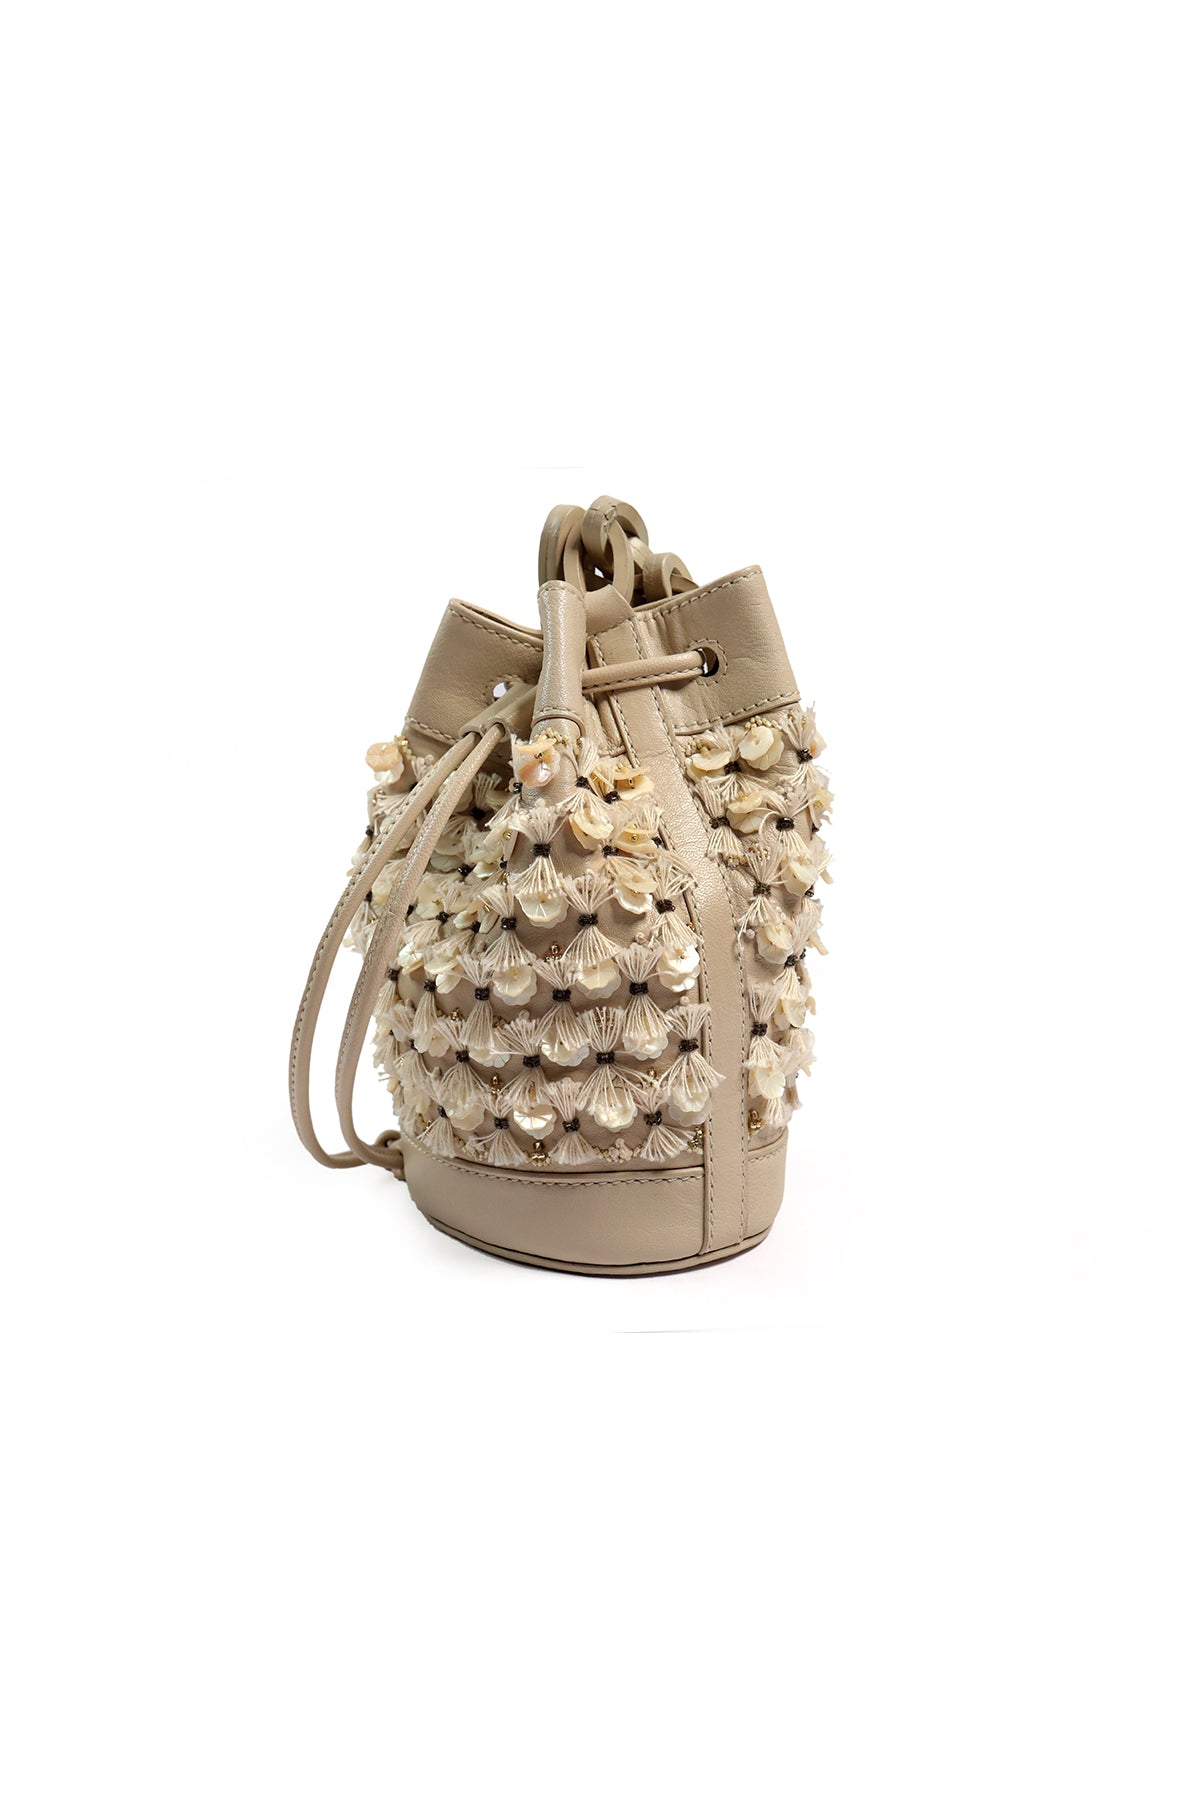 Lilac-Mother of Pearl Leather Bucket Bag